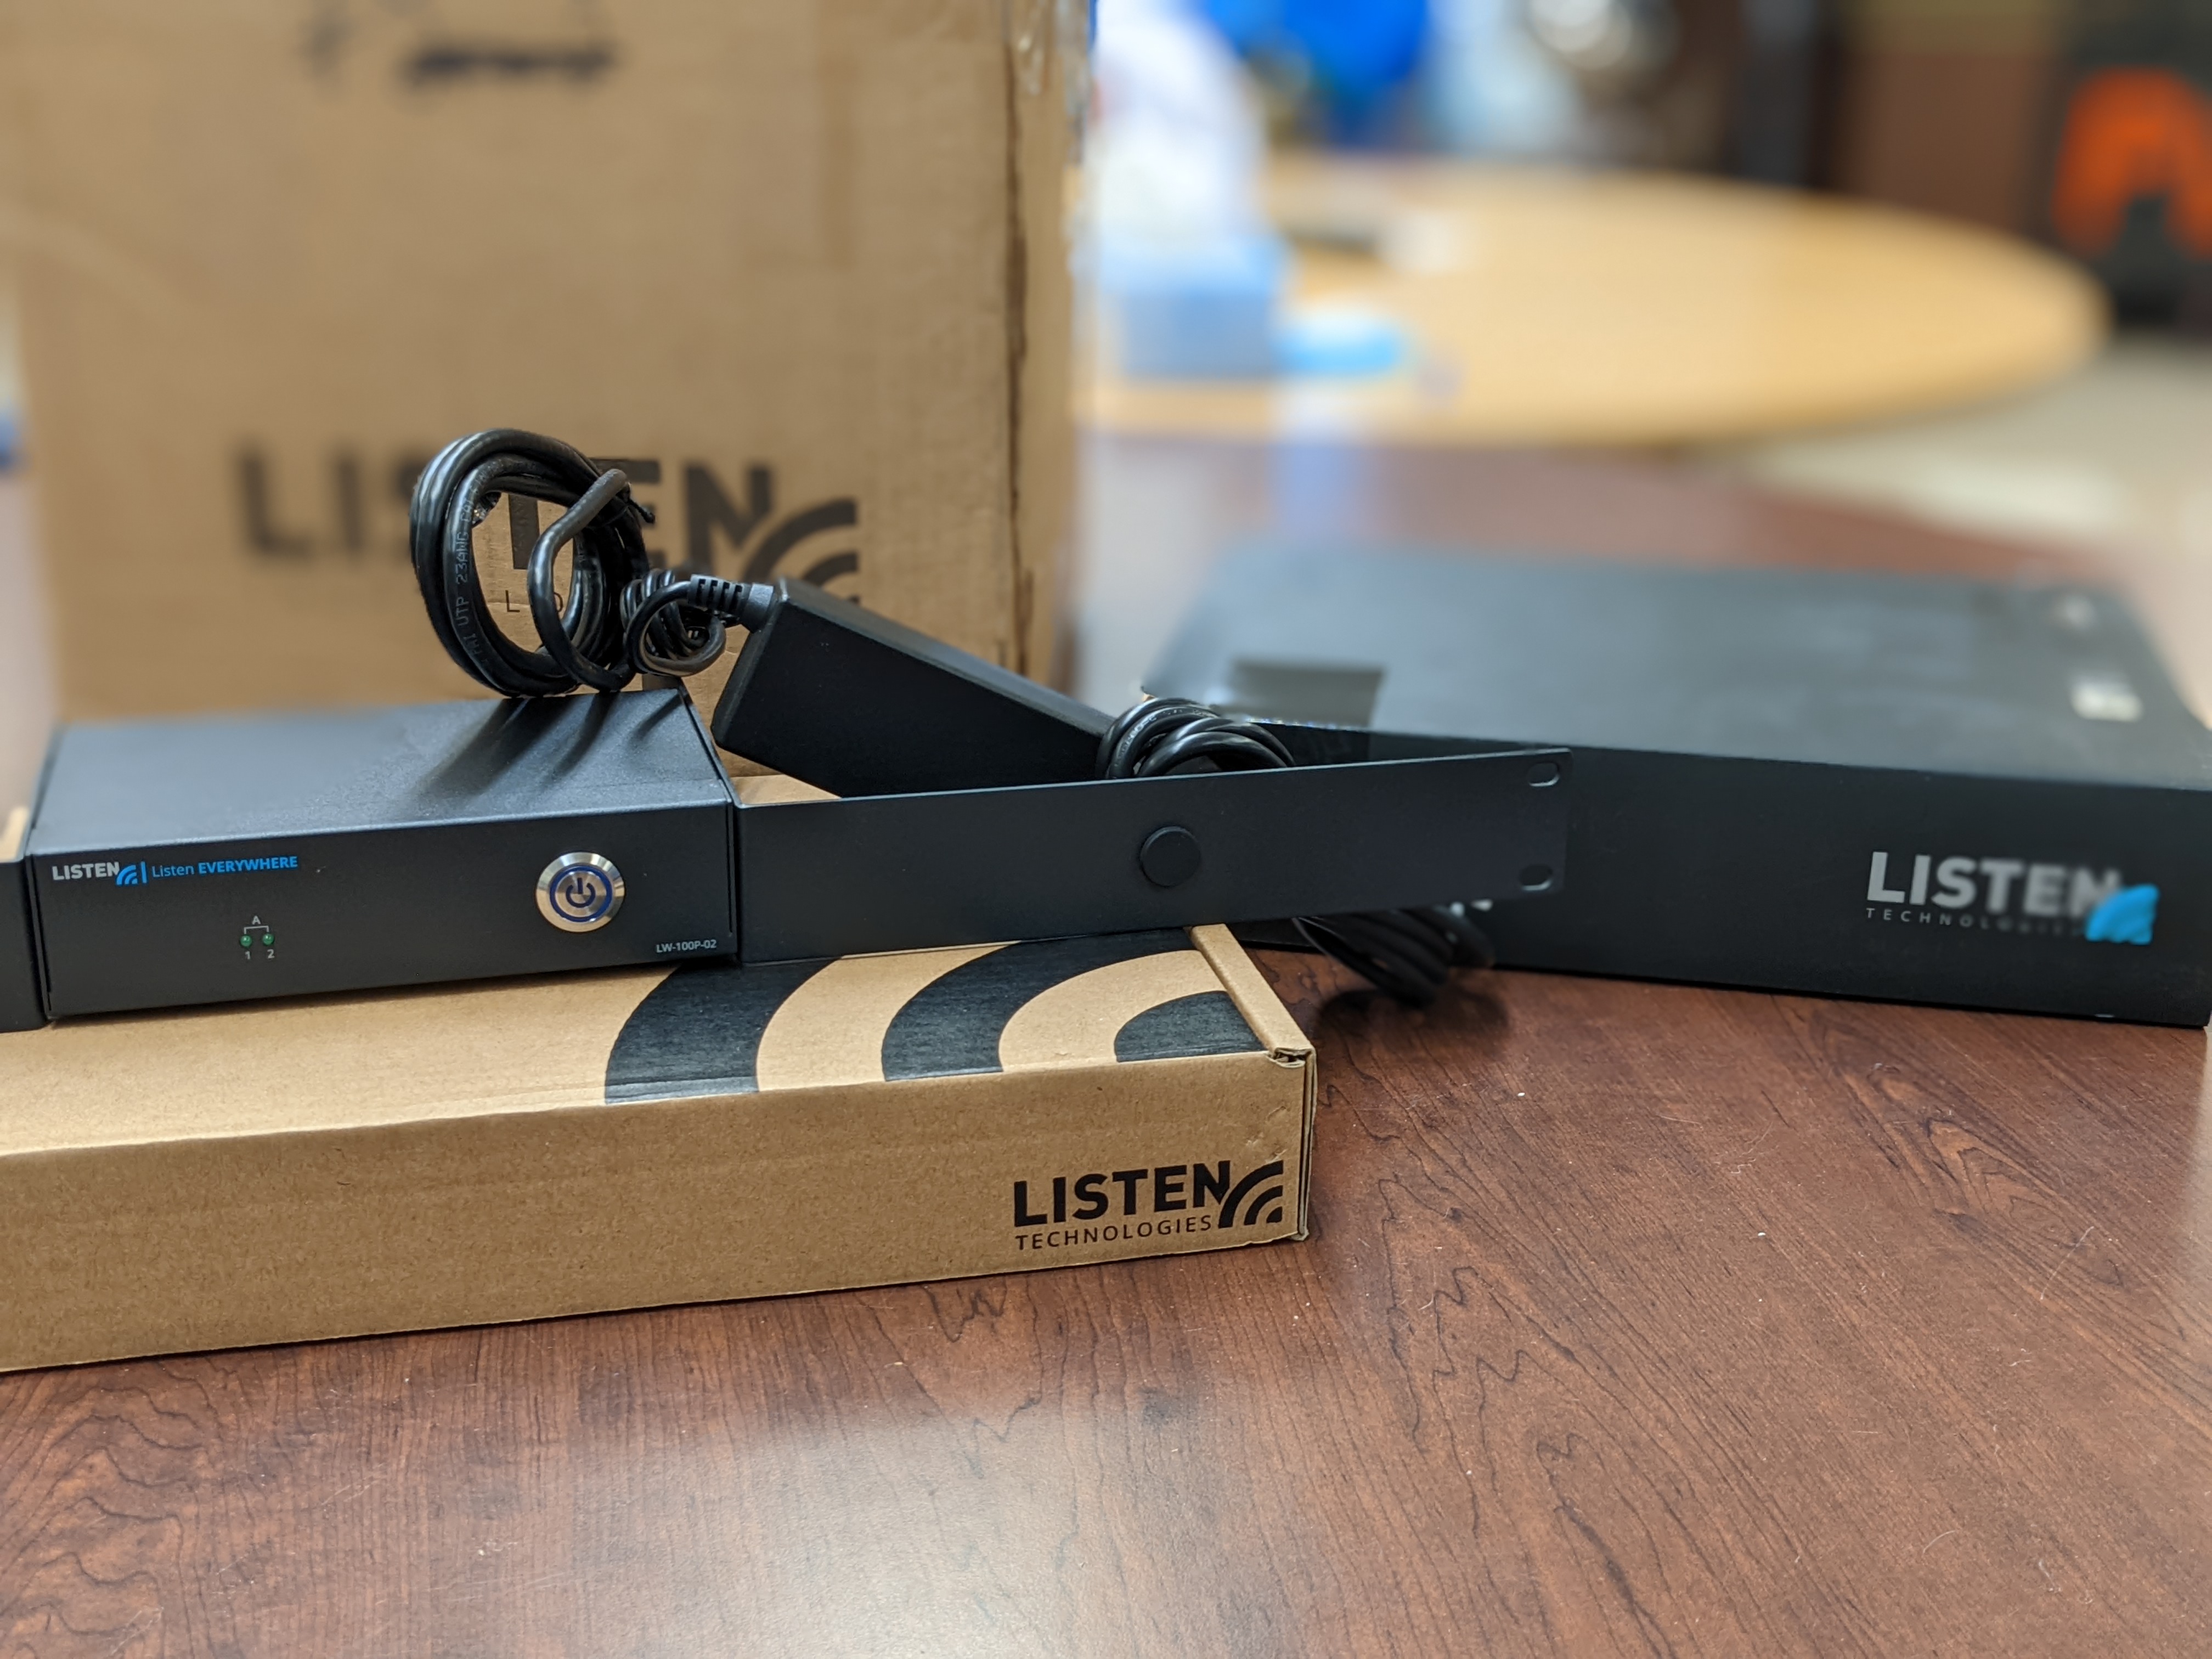 A photo showing the listen everywhere server with the rack ears attached